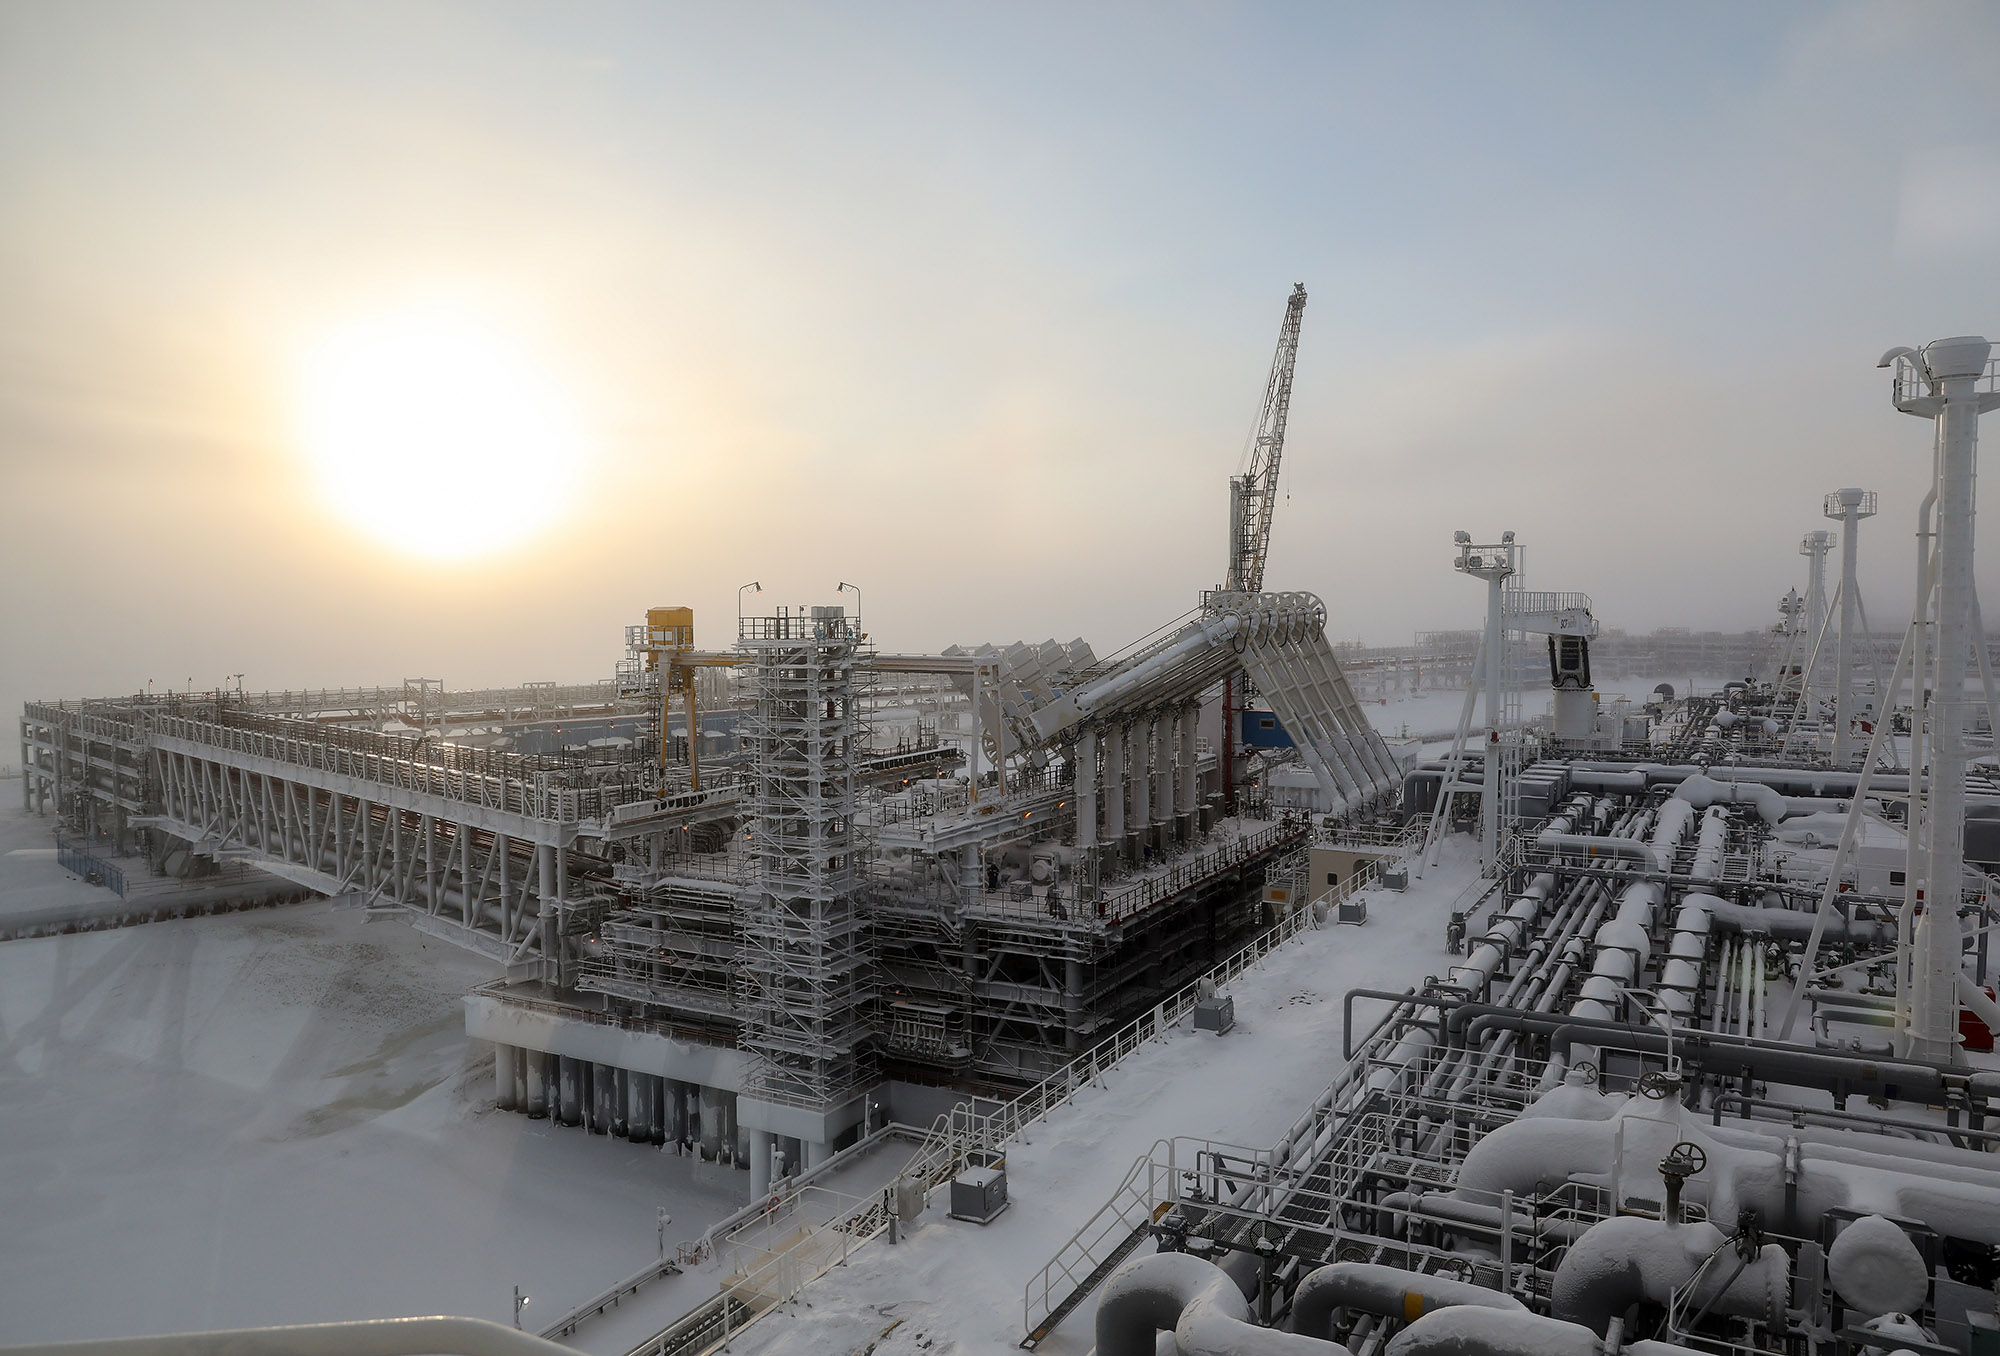 An&nbsp;Arctic tanker&nbsp;loading liquefied natural gas at the Yamal LNG plant in the port of Sabetta, Russia.&nbsp;